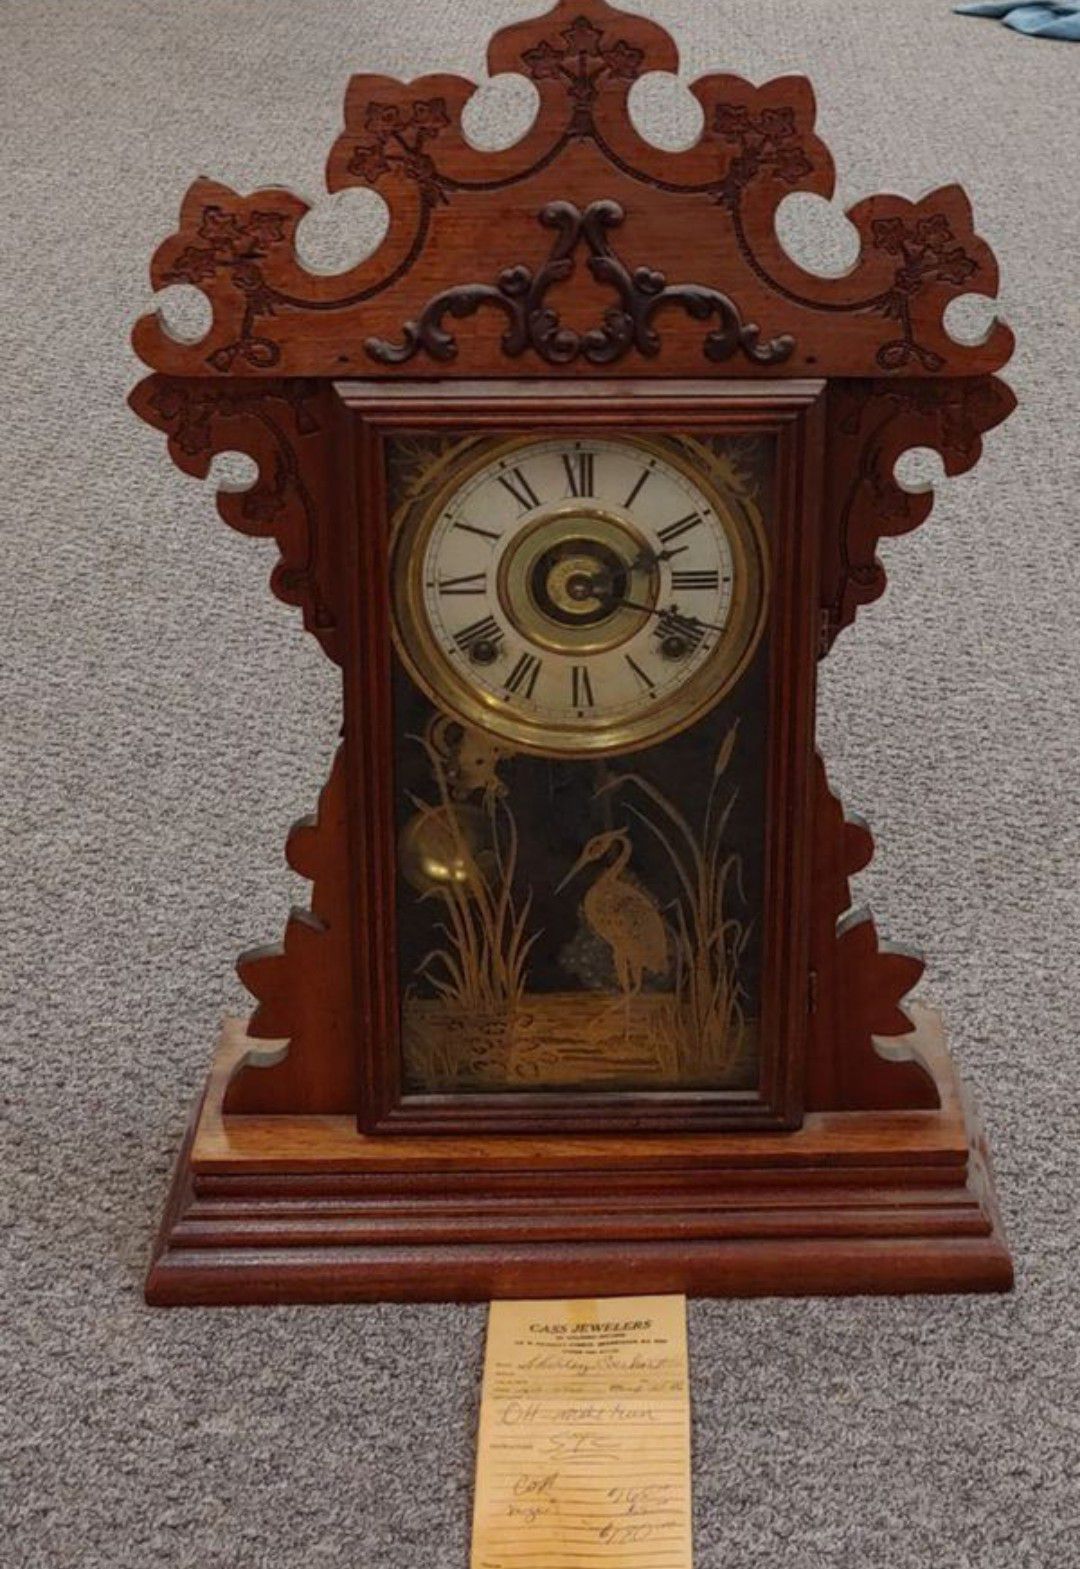 Antique Mantel Clock With Keys By Sessions Co.